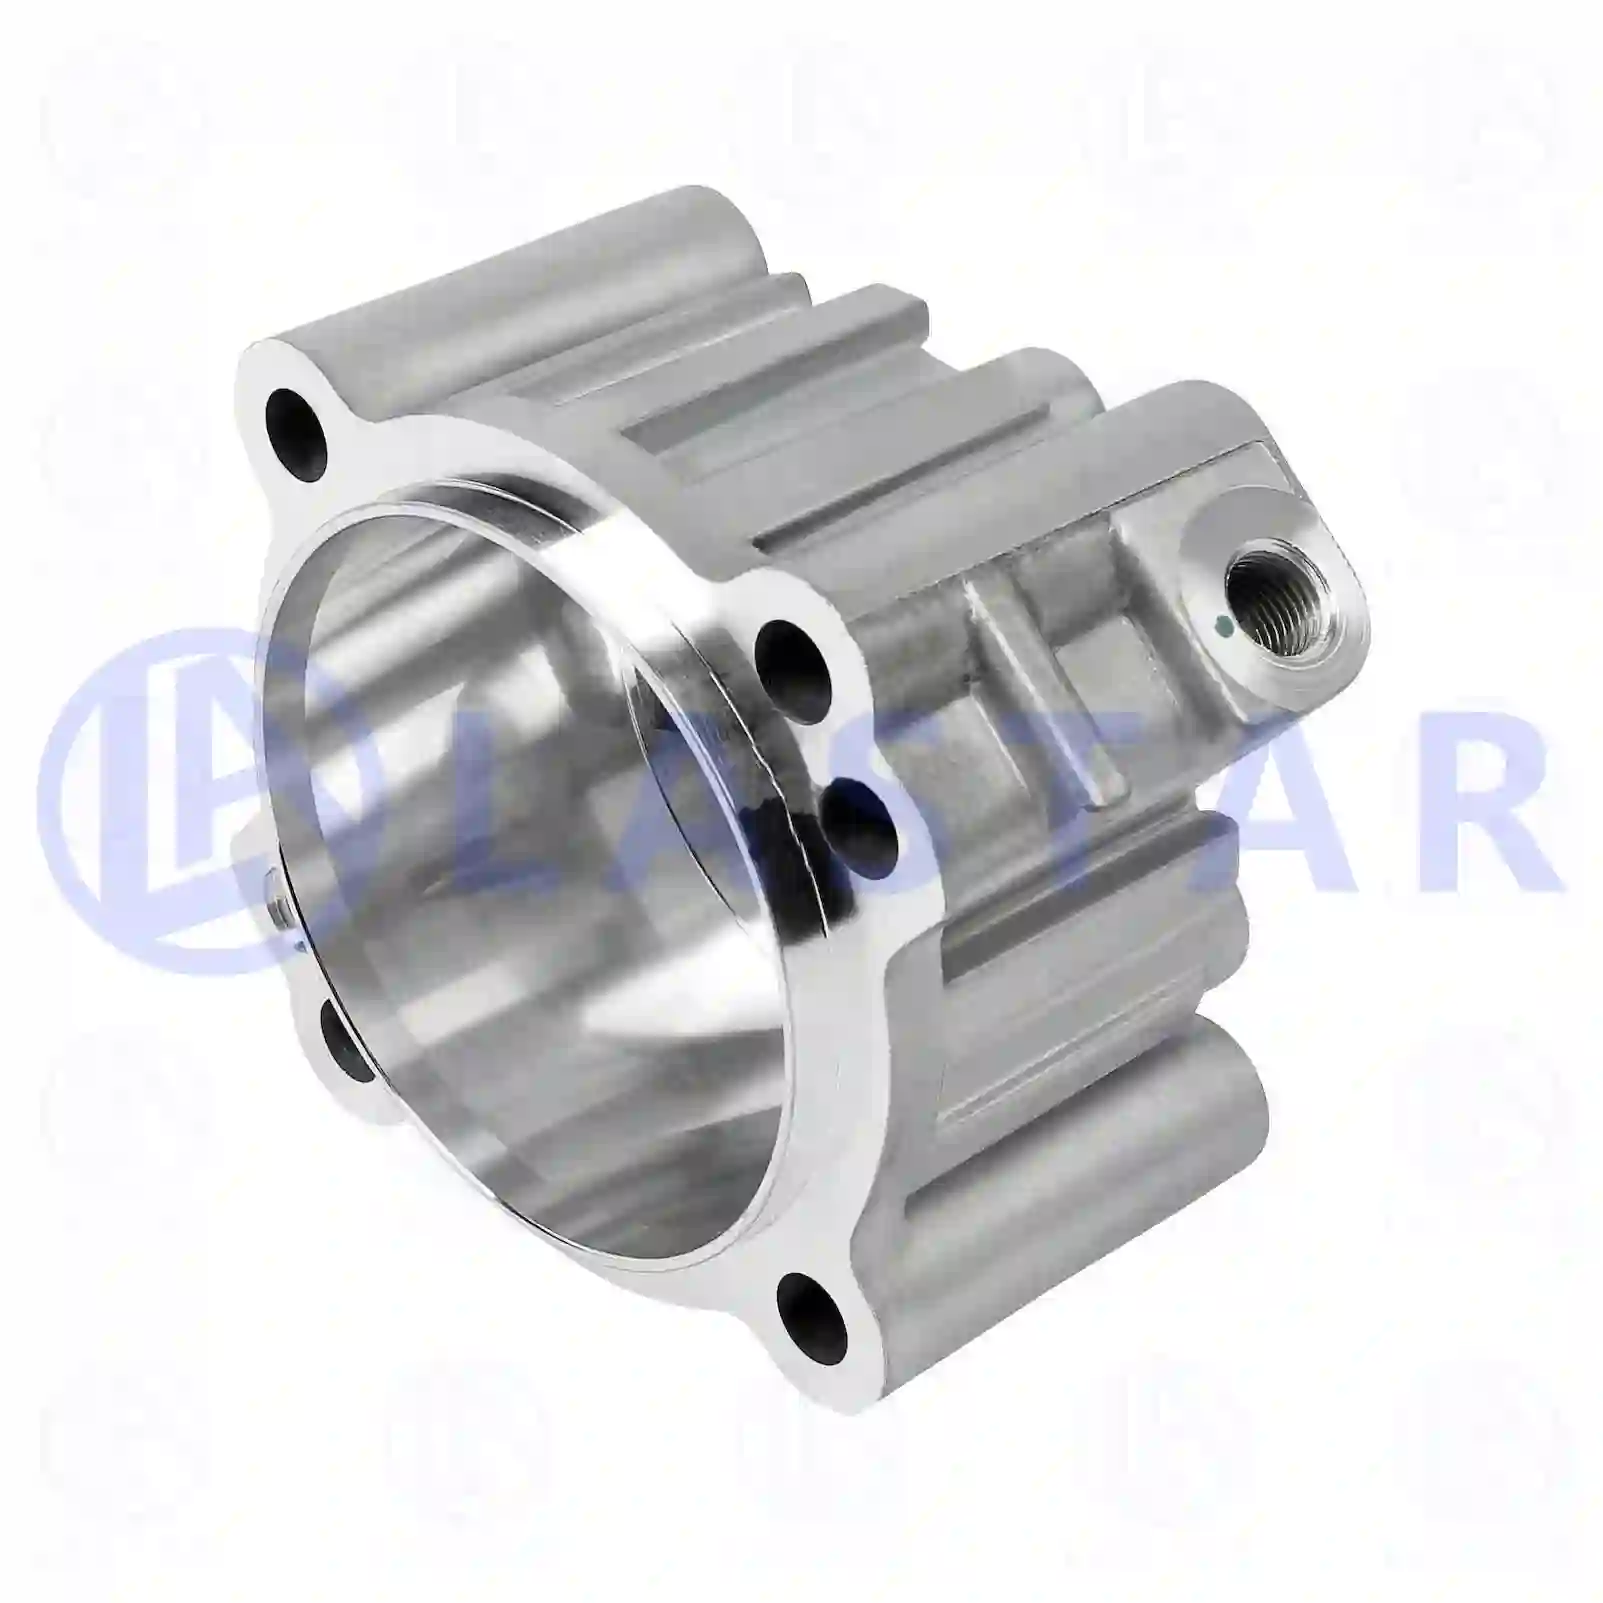 Shifting cylinder housing, 77732542, 0068348, 0692173, 68348, 68987, 692173, 07982230, 08198807, 7982230, 8198807, 81326380006, 81326380044, 0002670419, 0002670819, 0002672119, 5000289840, 5001859475, 1527363, 1662411, 1662959 ||  77732542 Lastar Spare Part | Truck Spare Parts, Auotomotive Spare Parts Shifting cylinder housing, 77732542, 0068348, 0692173, 68348, 68987, 692173, 07982230, 08198807, 7982230, 8198807, 81326380006, 81326380044, 0002670419, 0002670819, 0002672119, 5000289840, 5001859475, 1527363, 1662411, 1662959 ||  77732542 Lastar Spare Part | Truck Spare Parts, Auotomotive Spare Parts